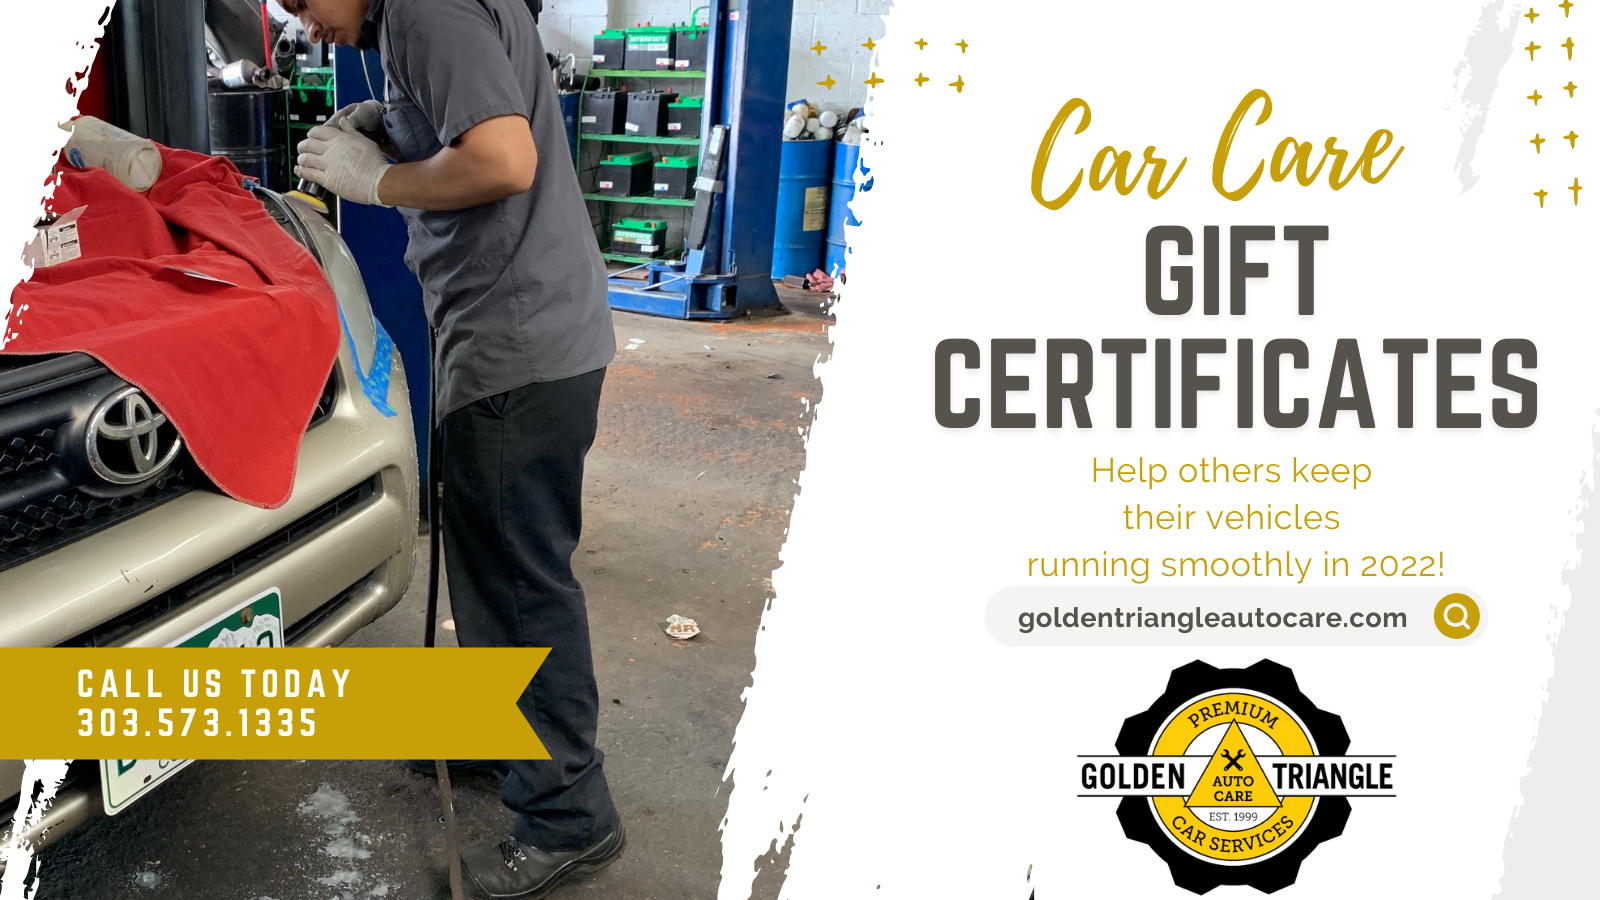 Car Care Gift Certificates at Golden Triangle Auto Care Denver CO